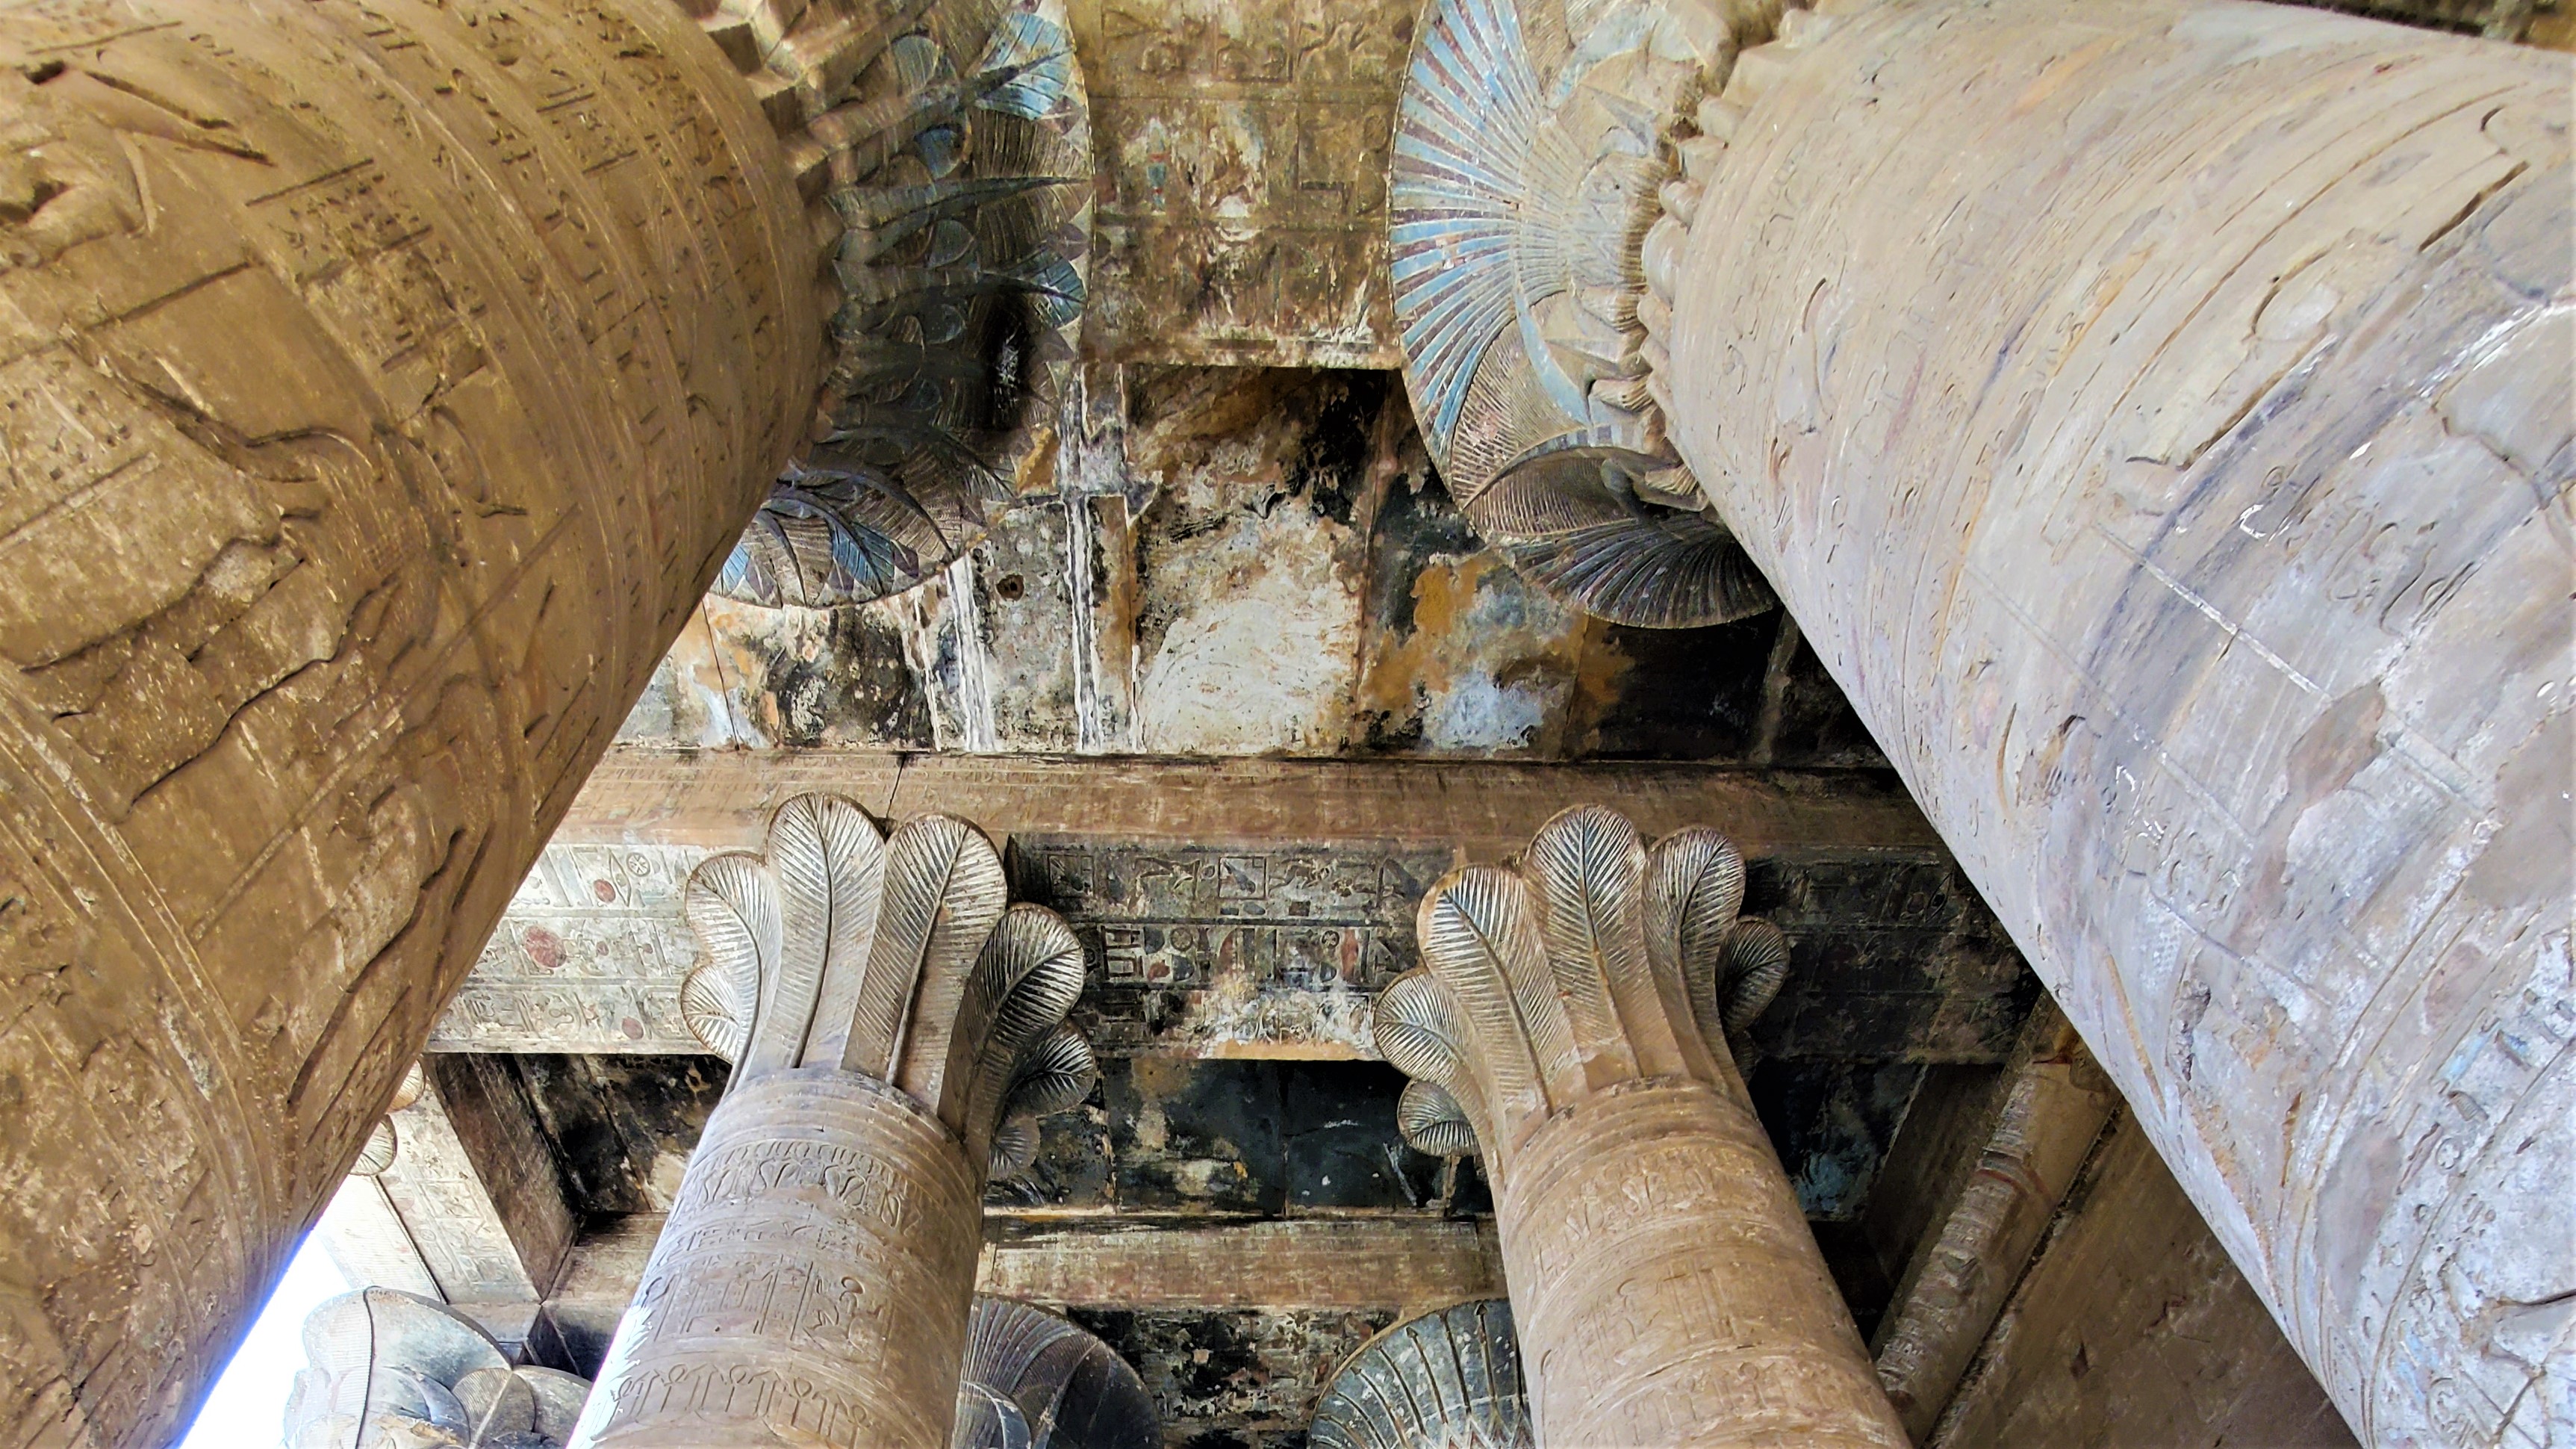 The colorful ceiling and columns at the Temple of Horus at Edfu, Egypt